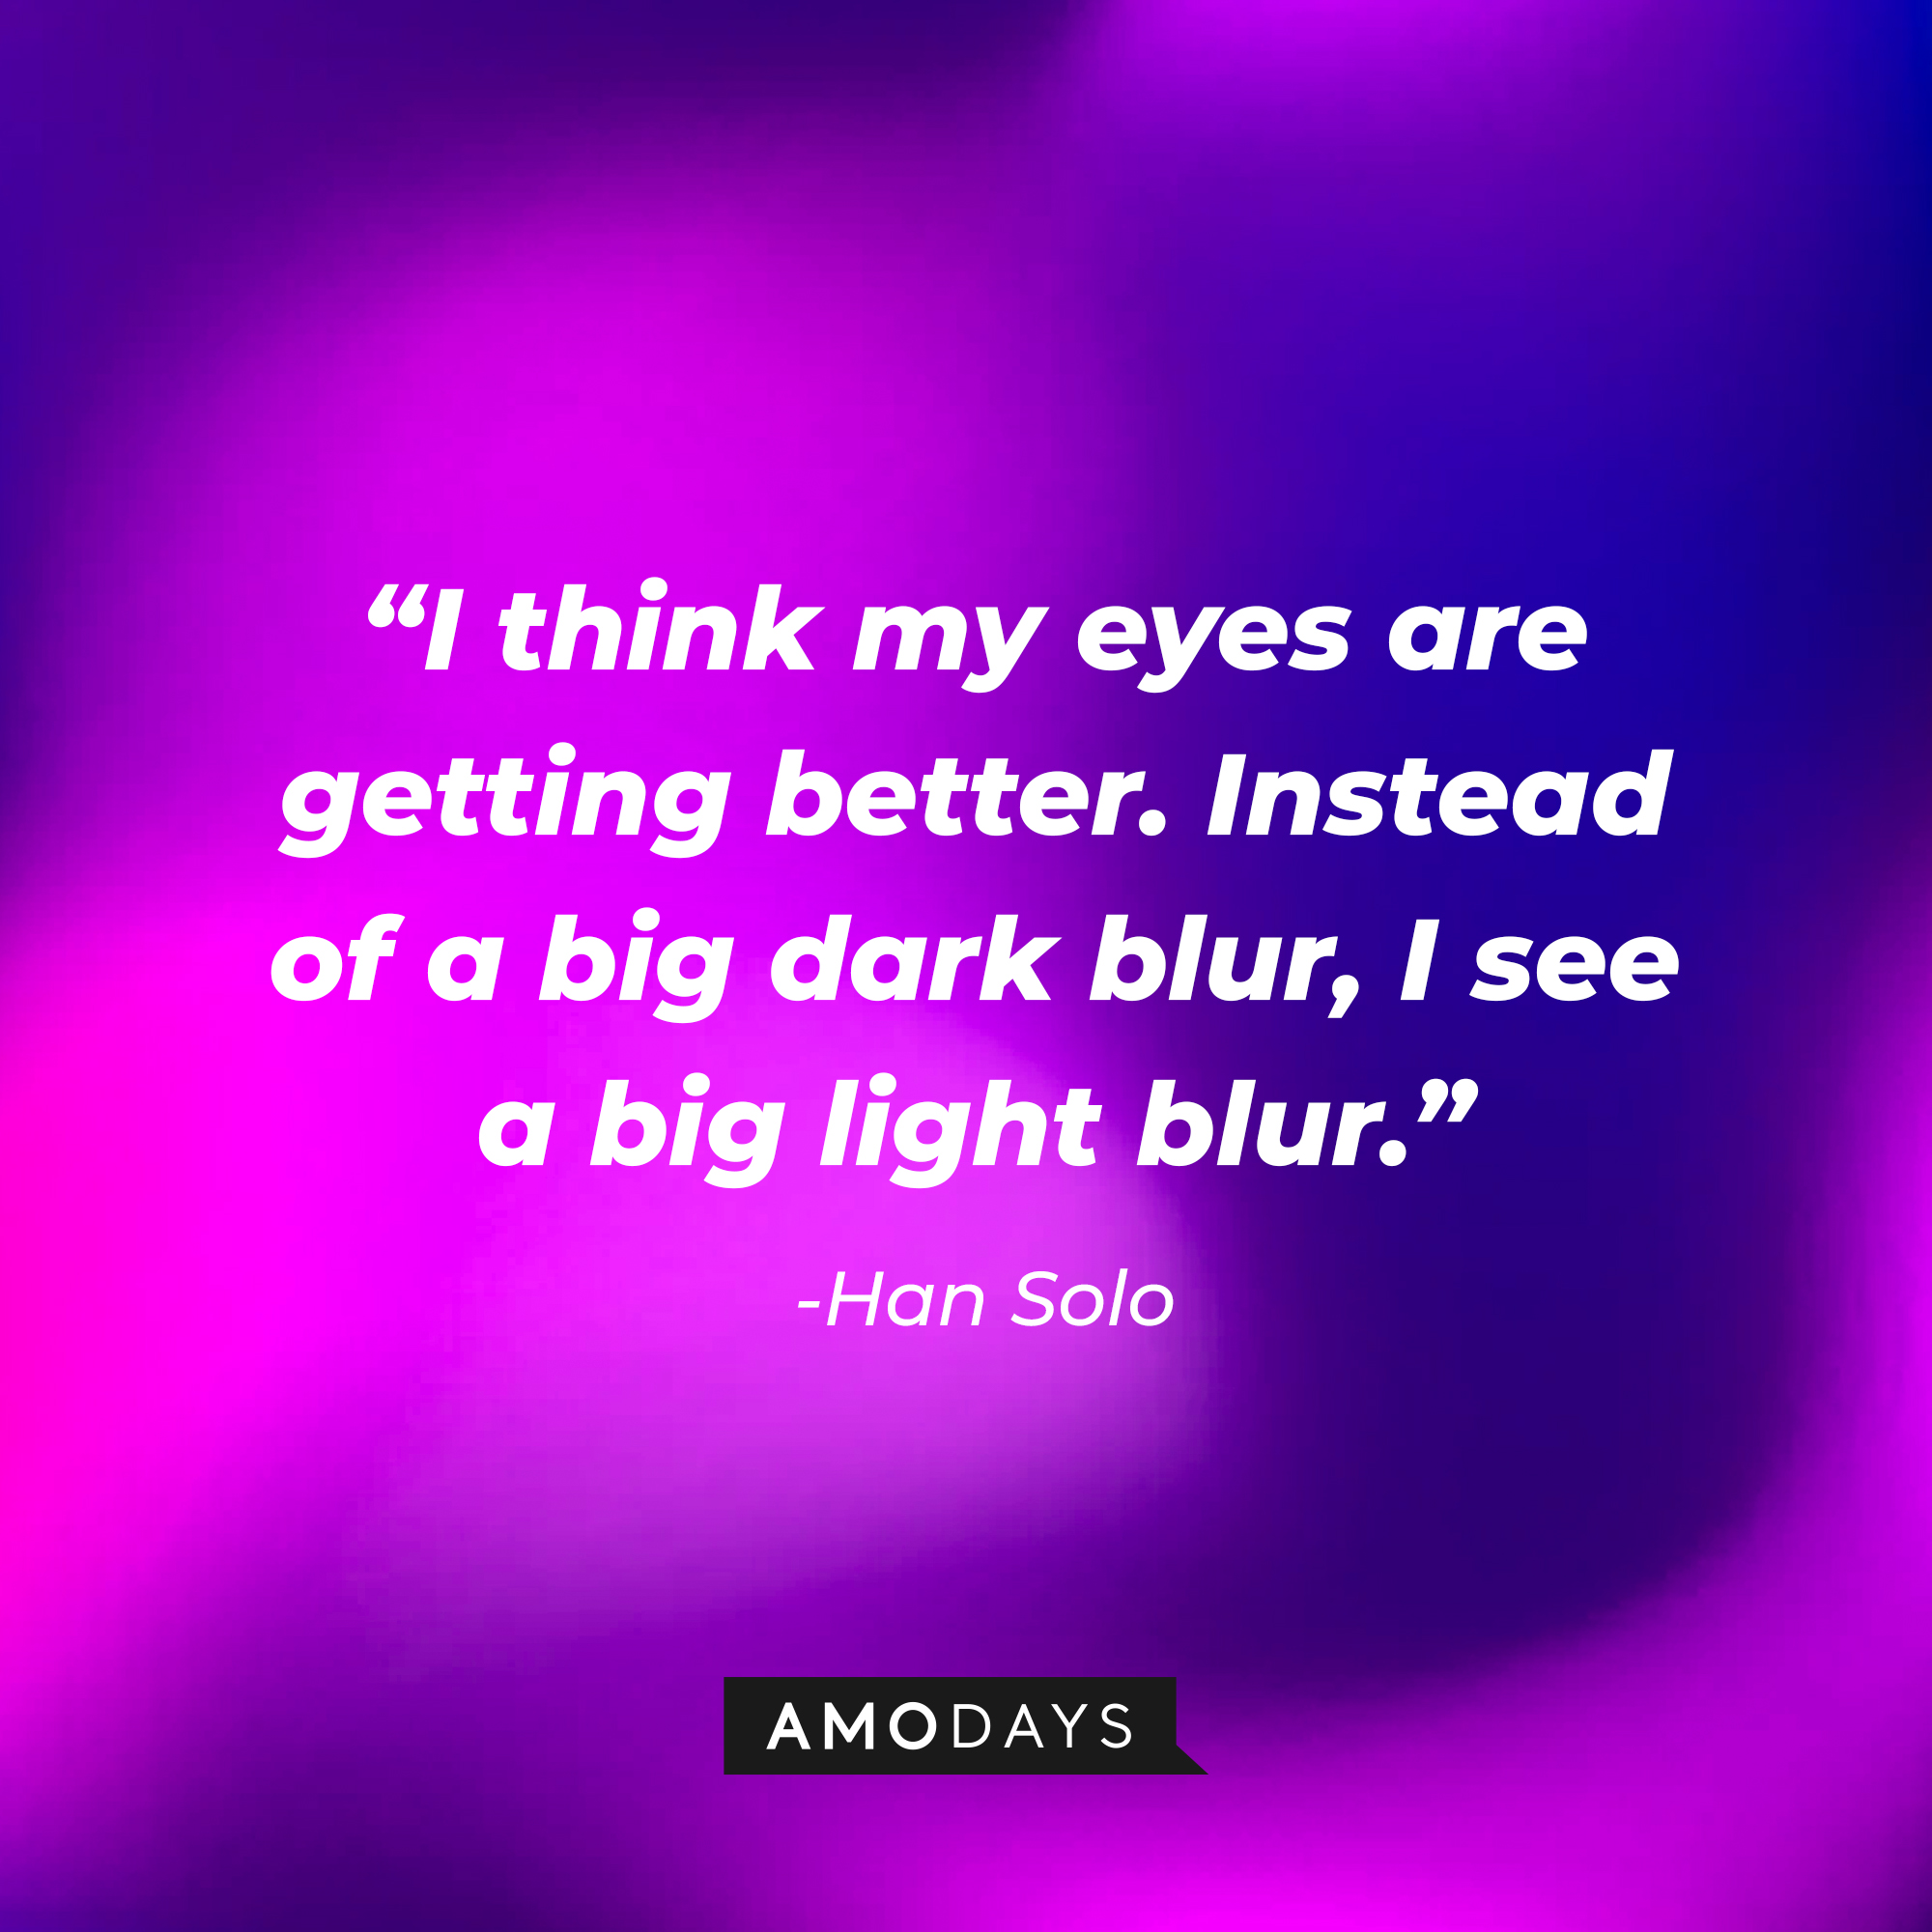 Han Solo’s quote: “I think my eyes are getting better. Instead of a big dark blur, I see a big light blur.”   | Source: AmoDays